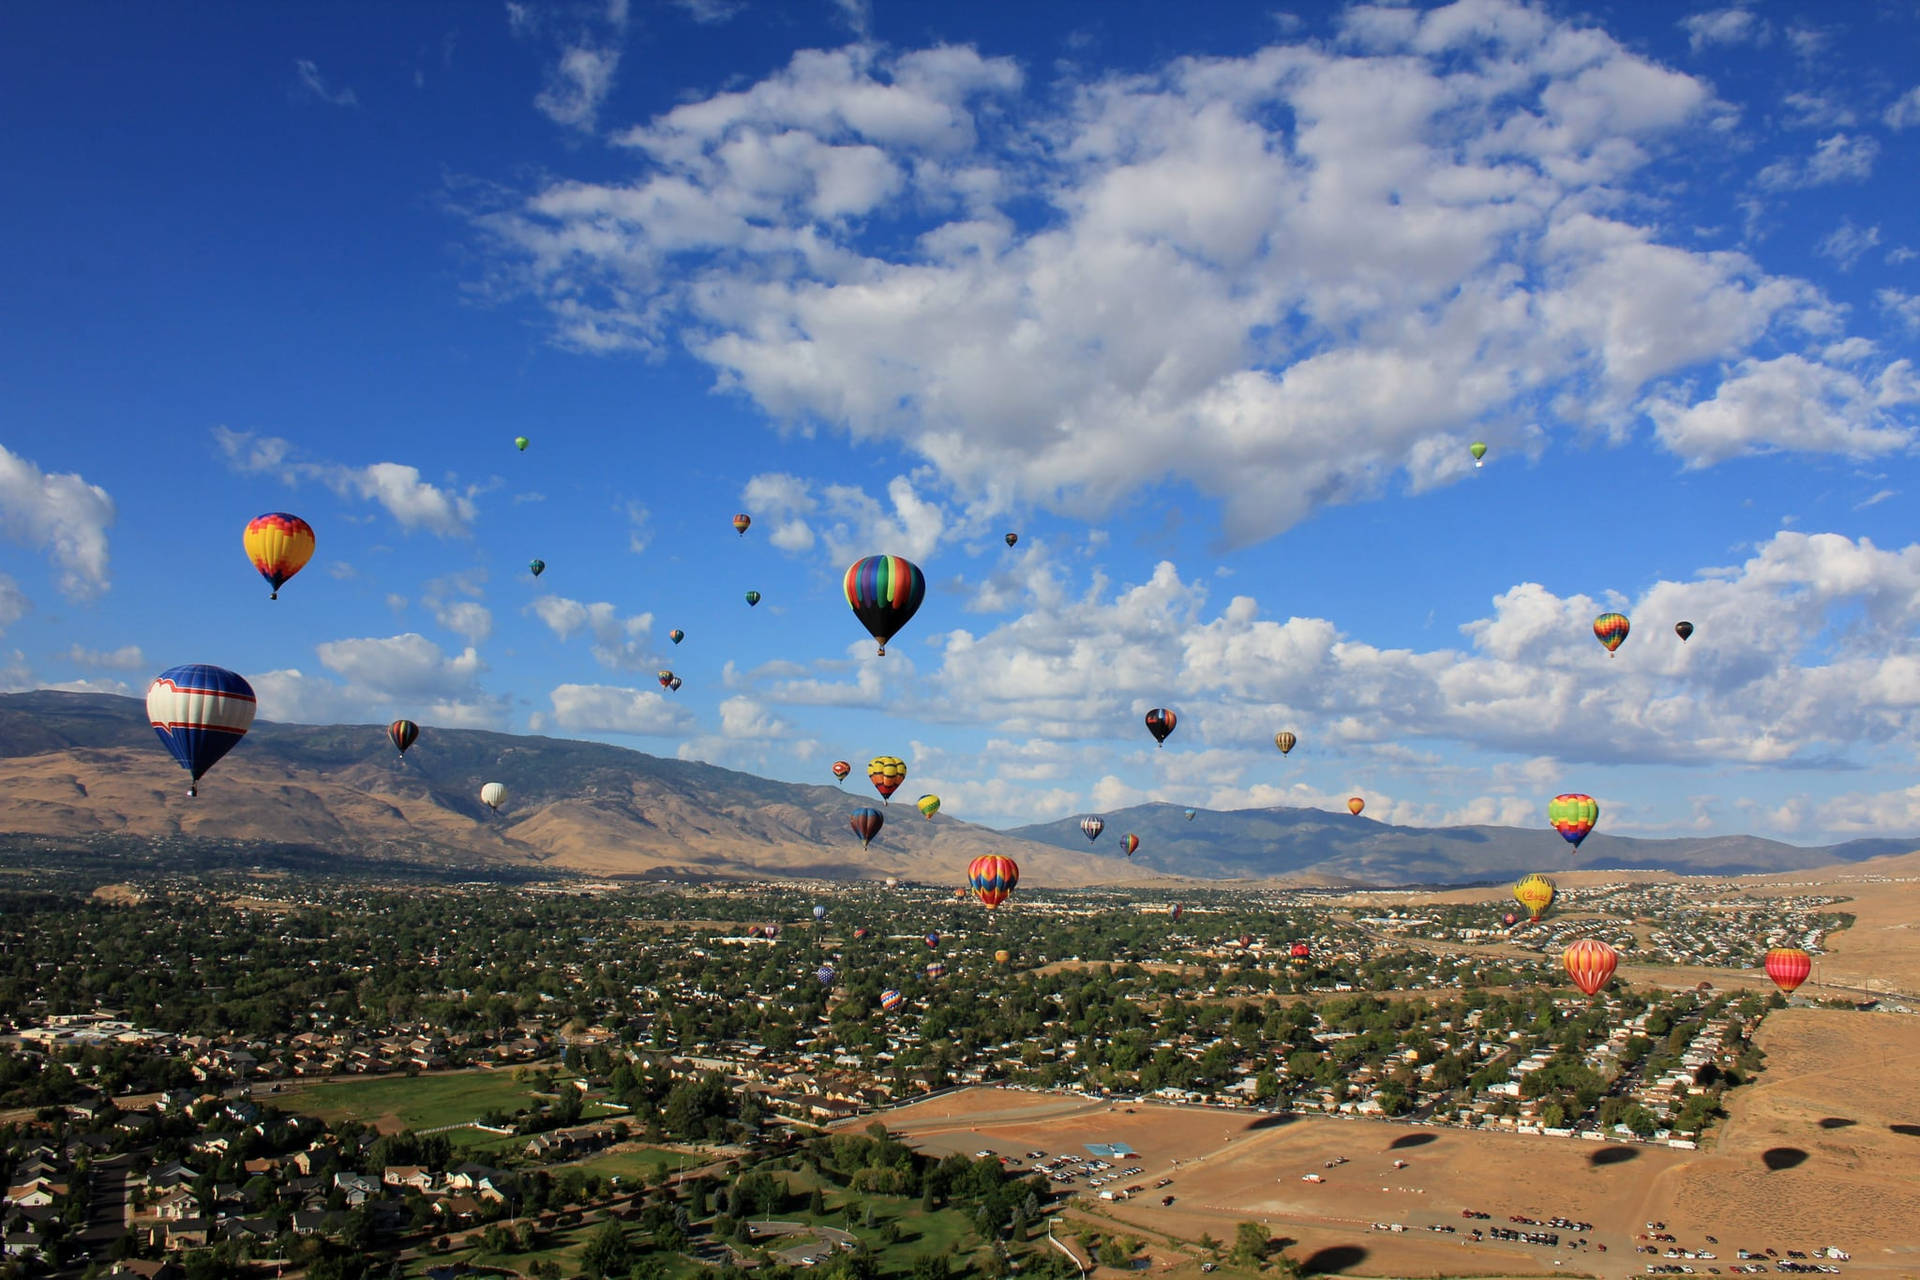 Take A Scenic Hot Air Balloon Ride Over Reno! Background